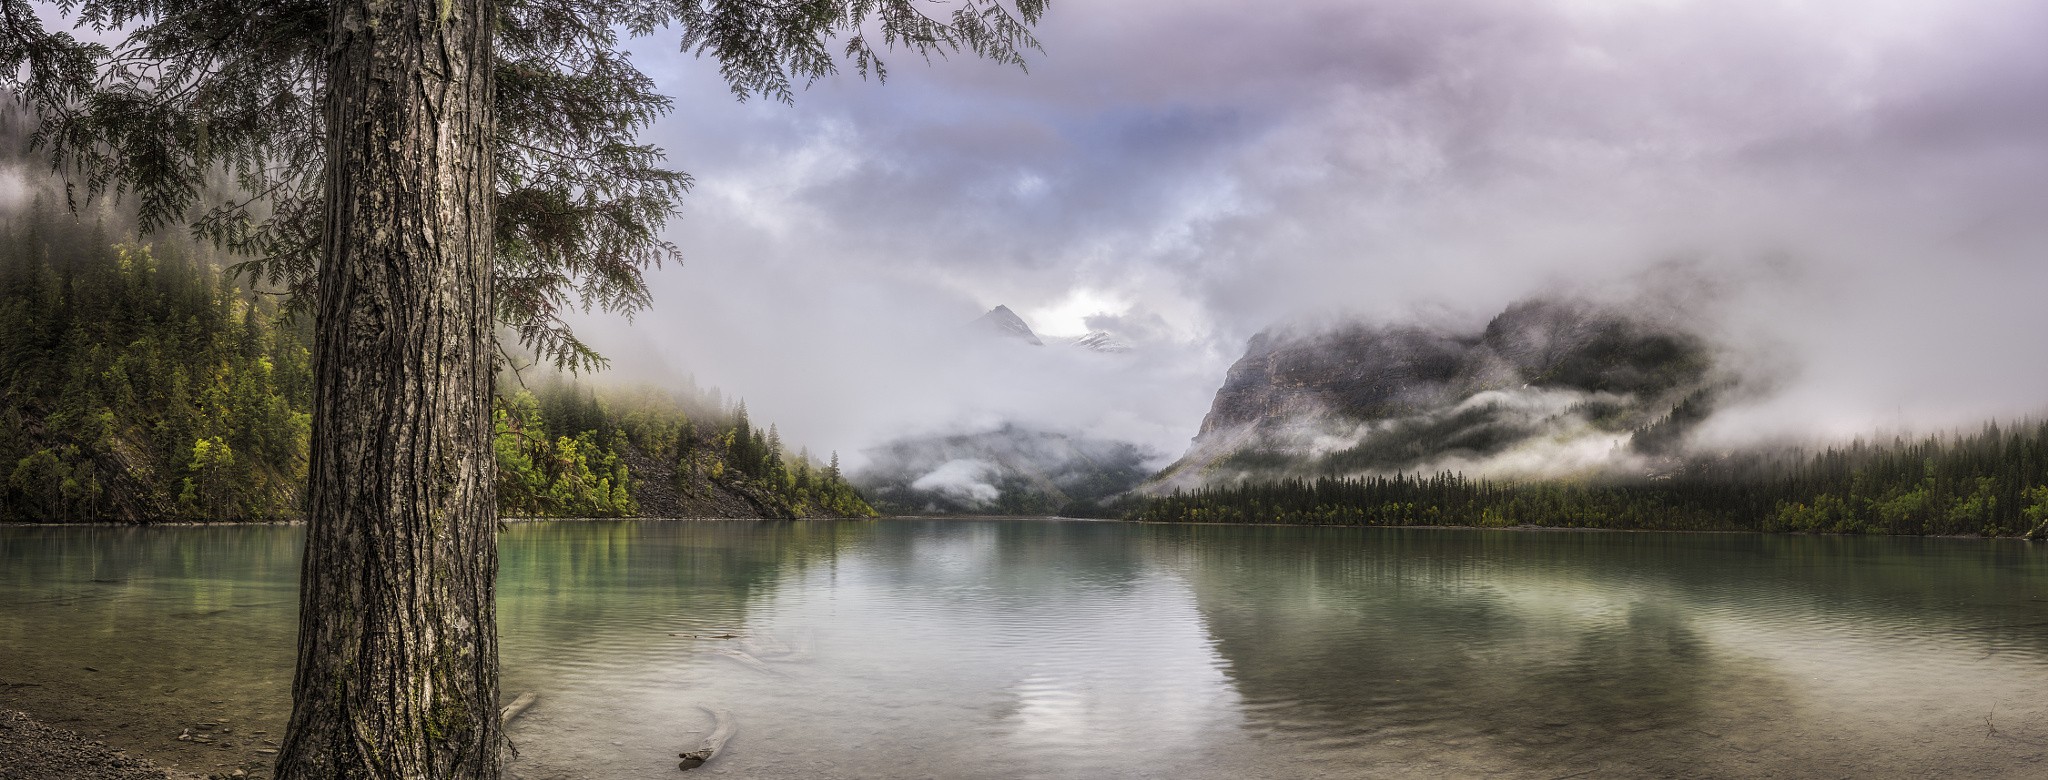 General 2048x780 nature landscape lake mist panorama forest mountains clouds water British Columbia Canada trees